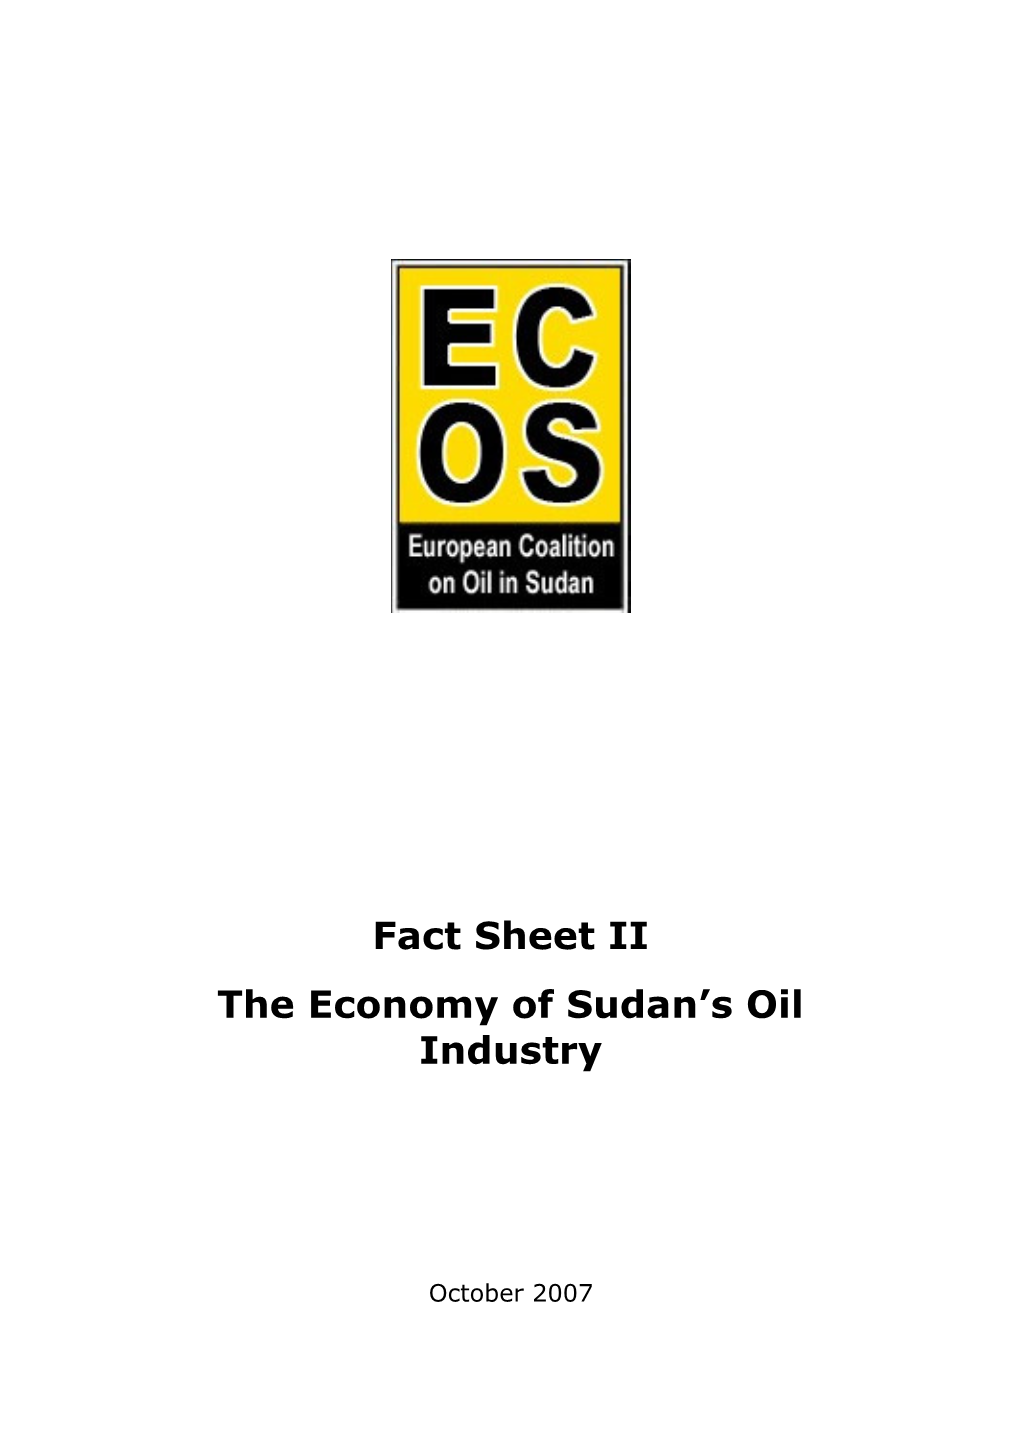 Fact Sheet II the Economy of Sudan's Oil Industry